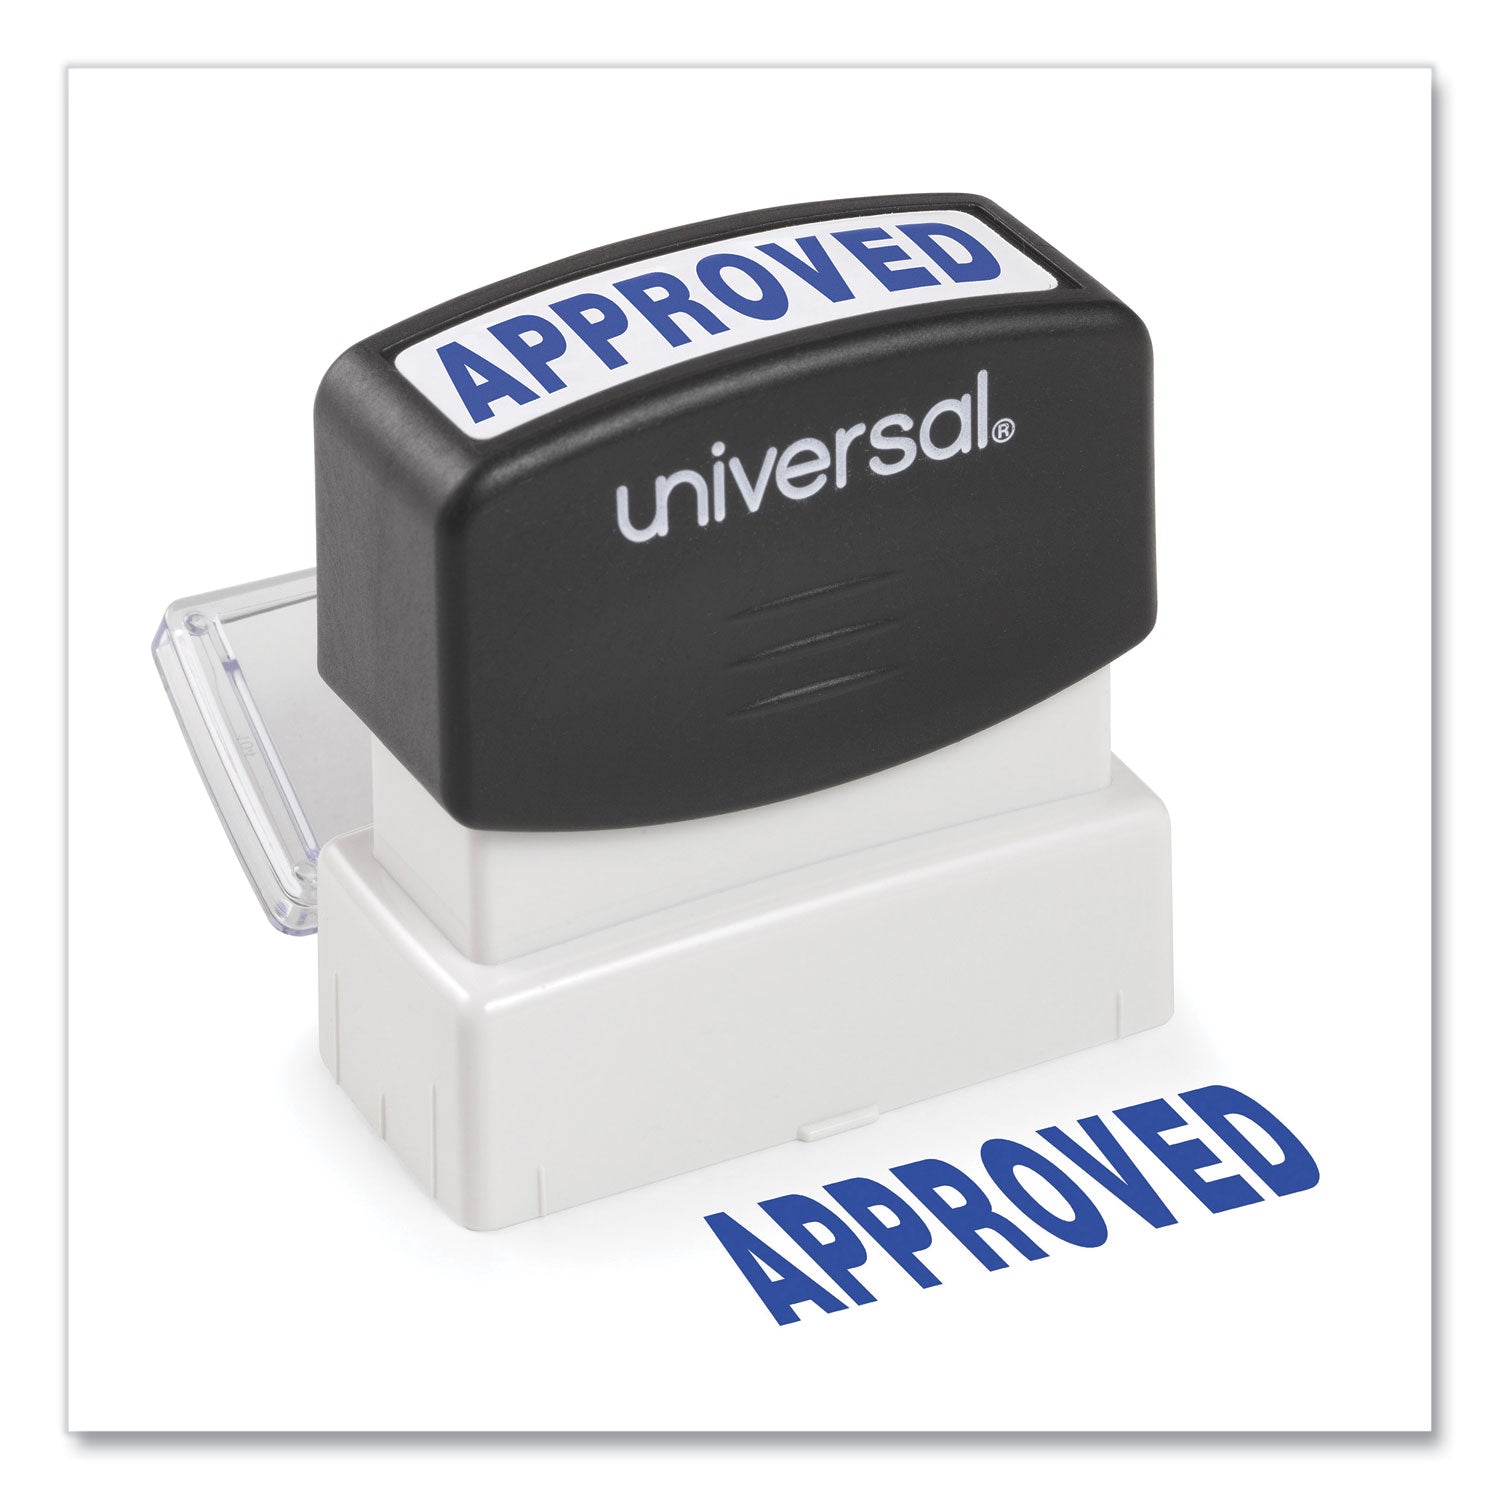 Message Stamp, APPROVED, Pre-Inked One-Color, Blue - 